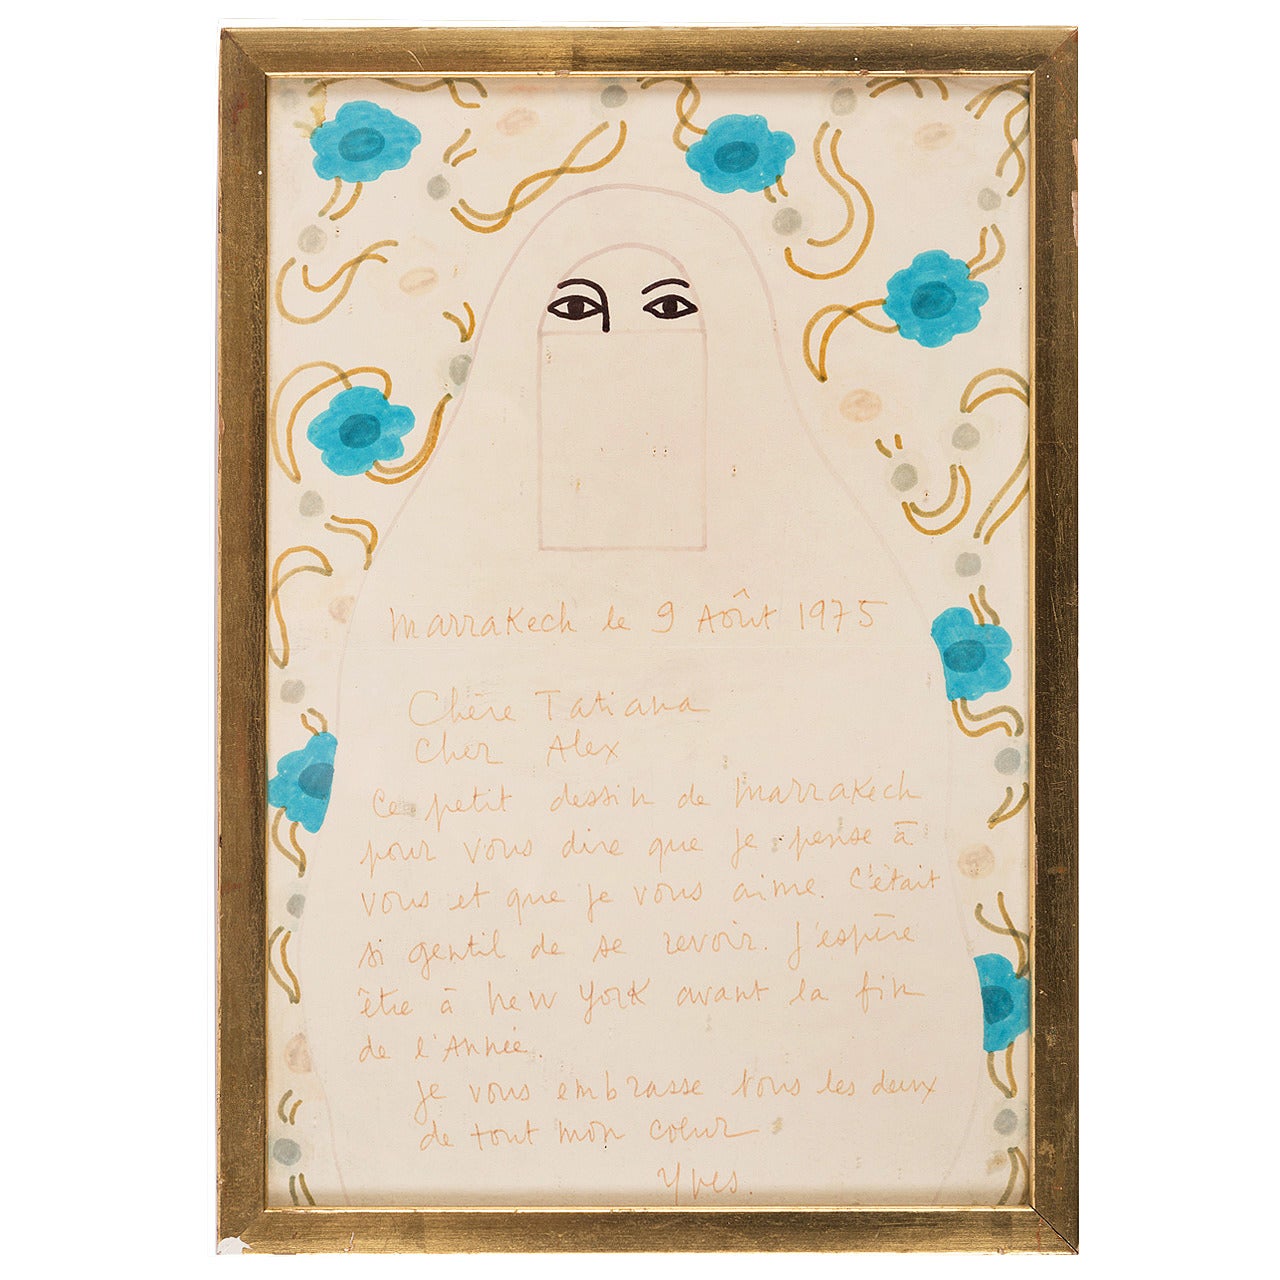 Drawing and Note by Yves Saint Laurent, 1975